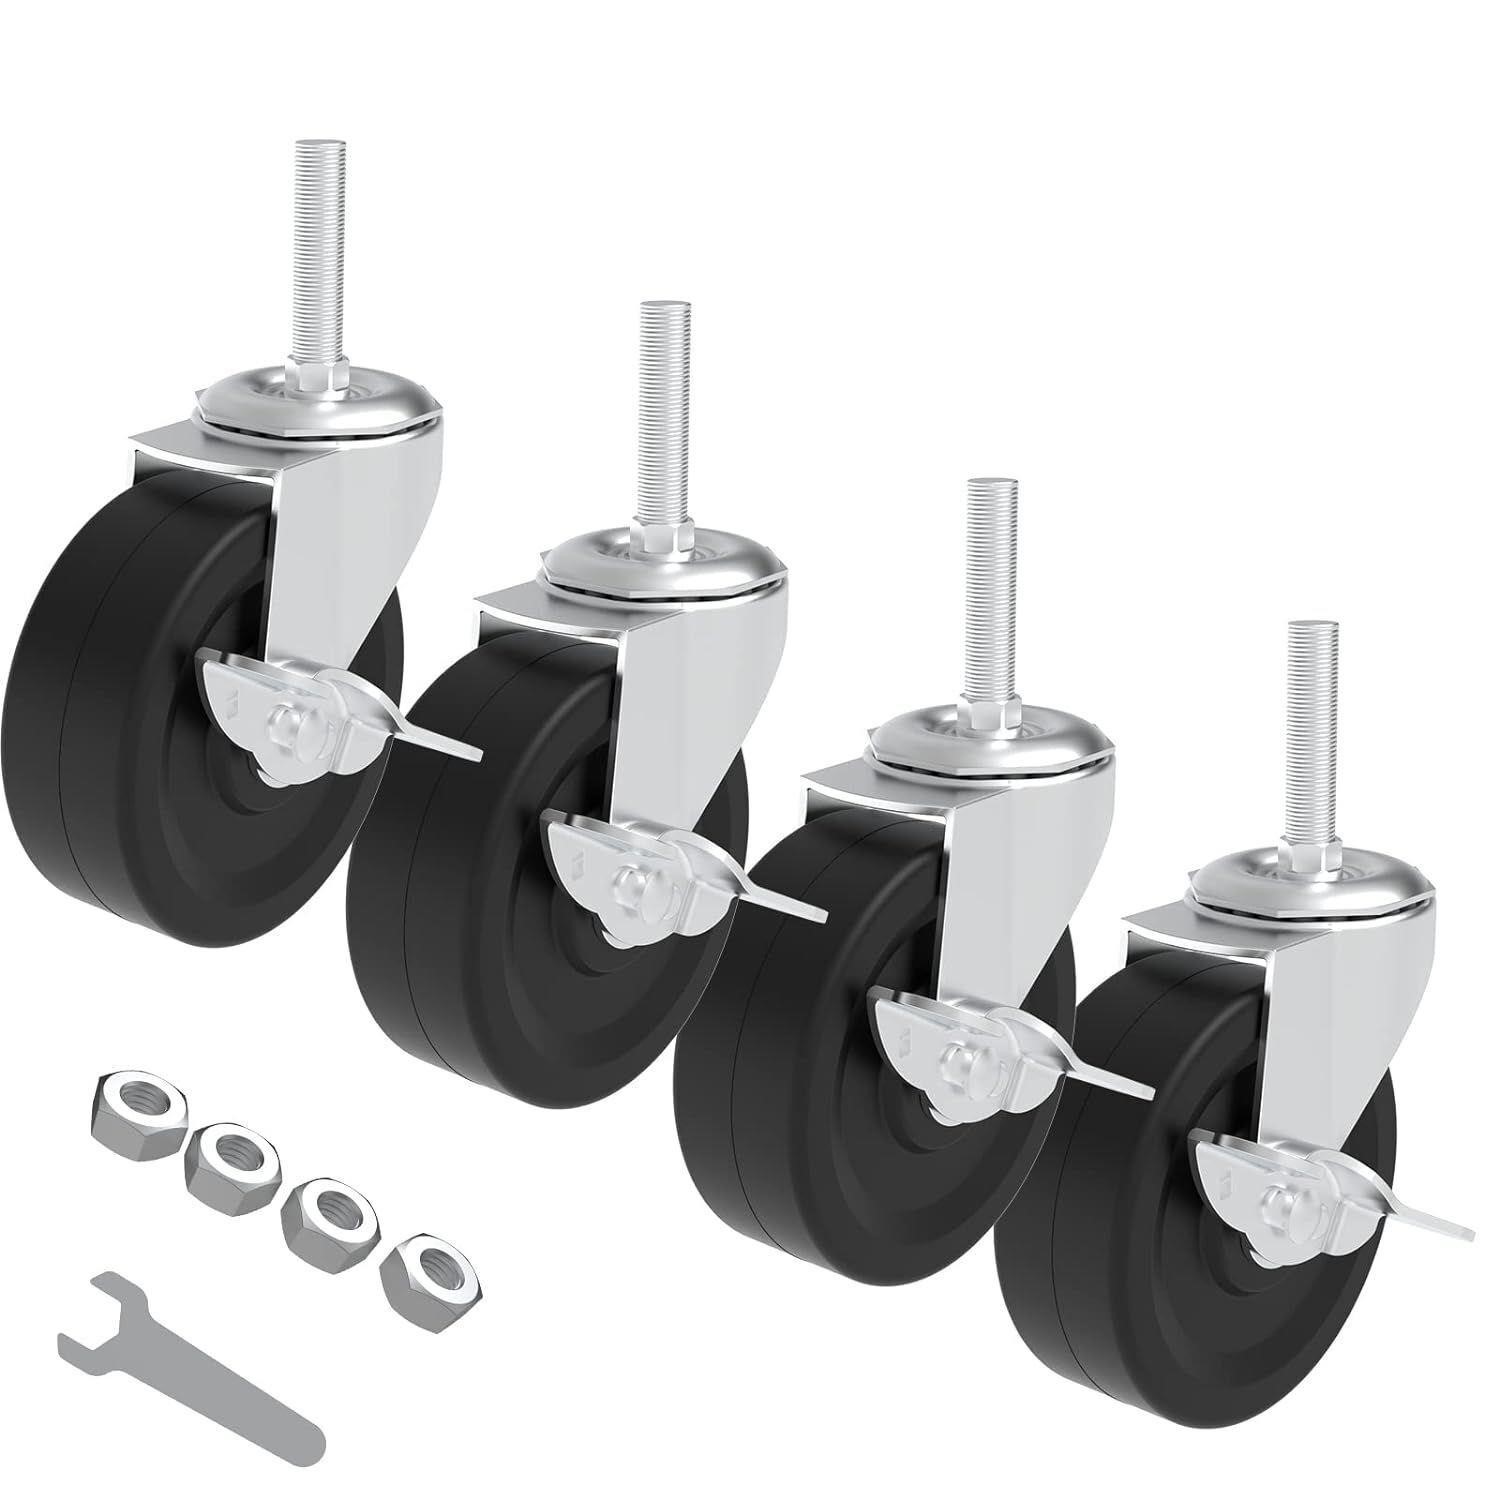 --LOT OF 2 HYEJDRV Casters Set of 4, 3-Inch Caster